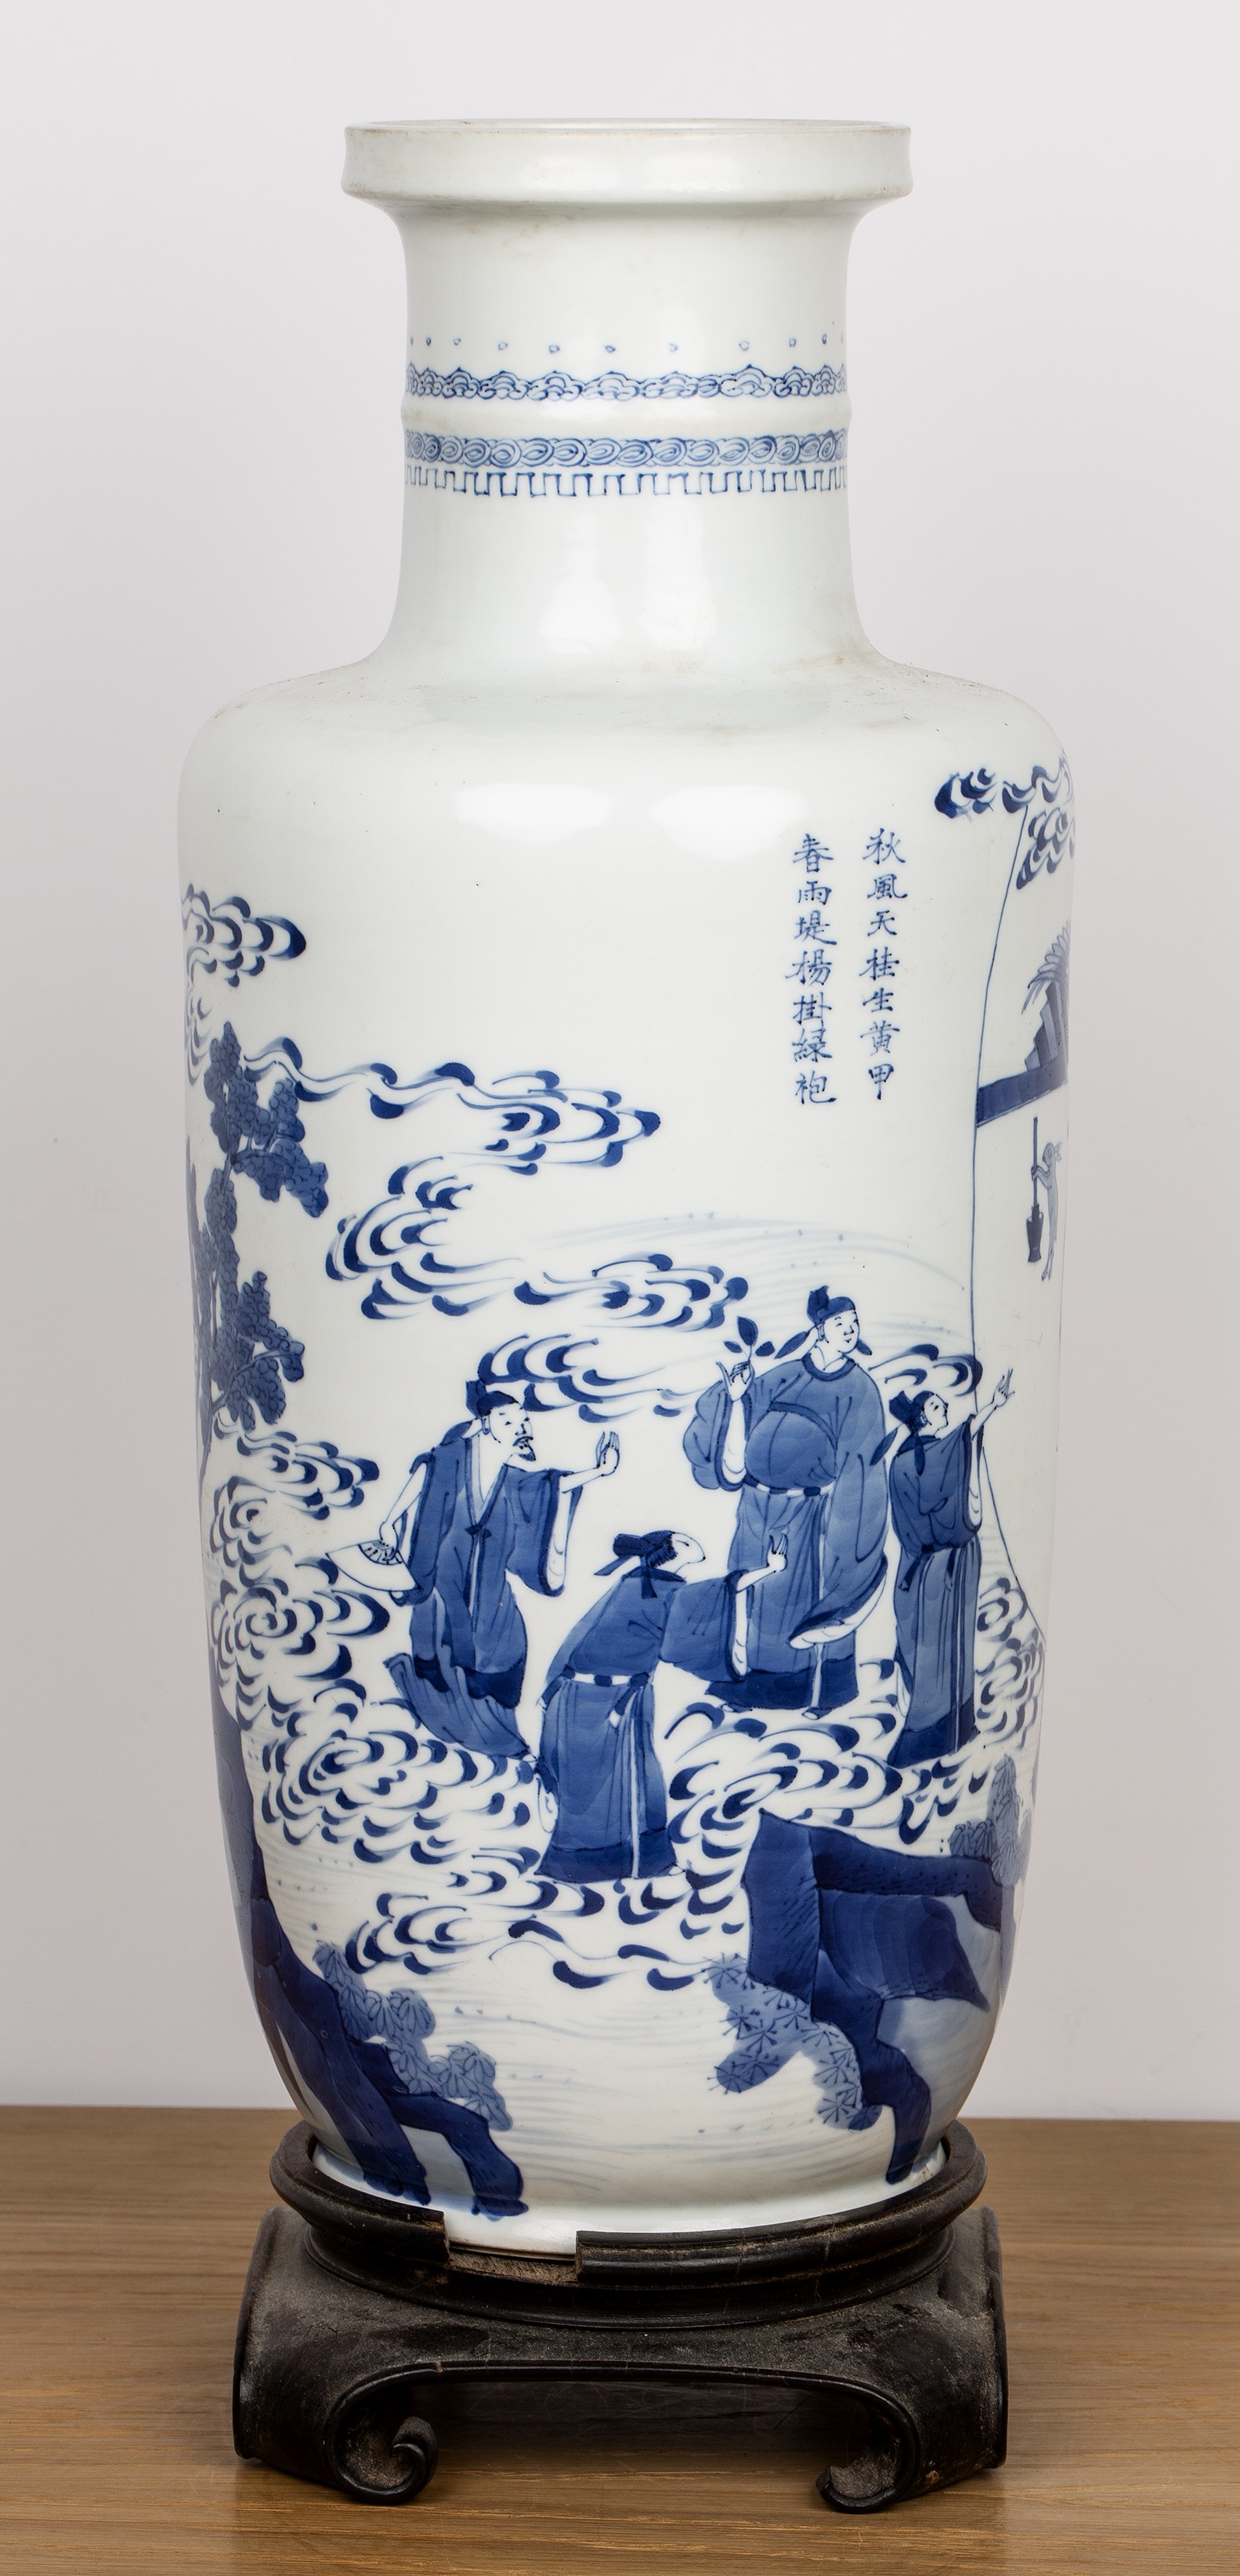 Blue and white porcelain rouleau vase Chinese, Kangxi painted with scholars, clouds, and figures - Image 3 of 33